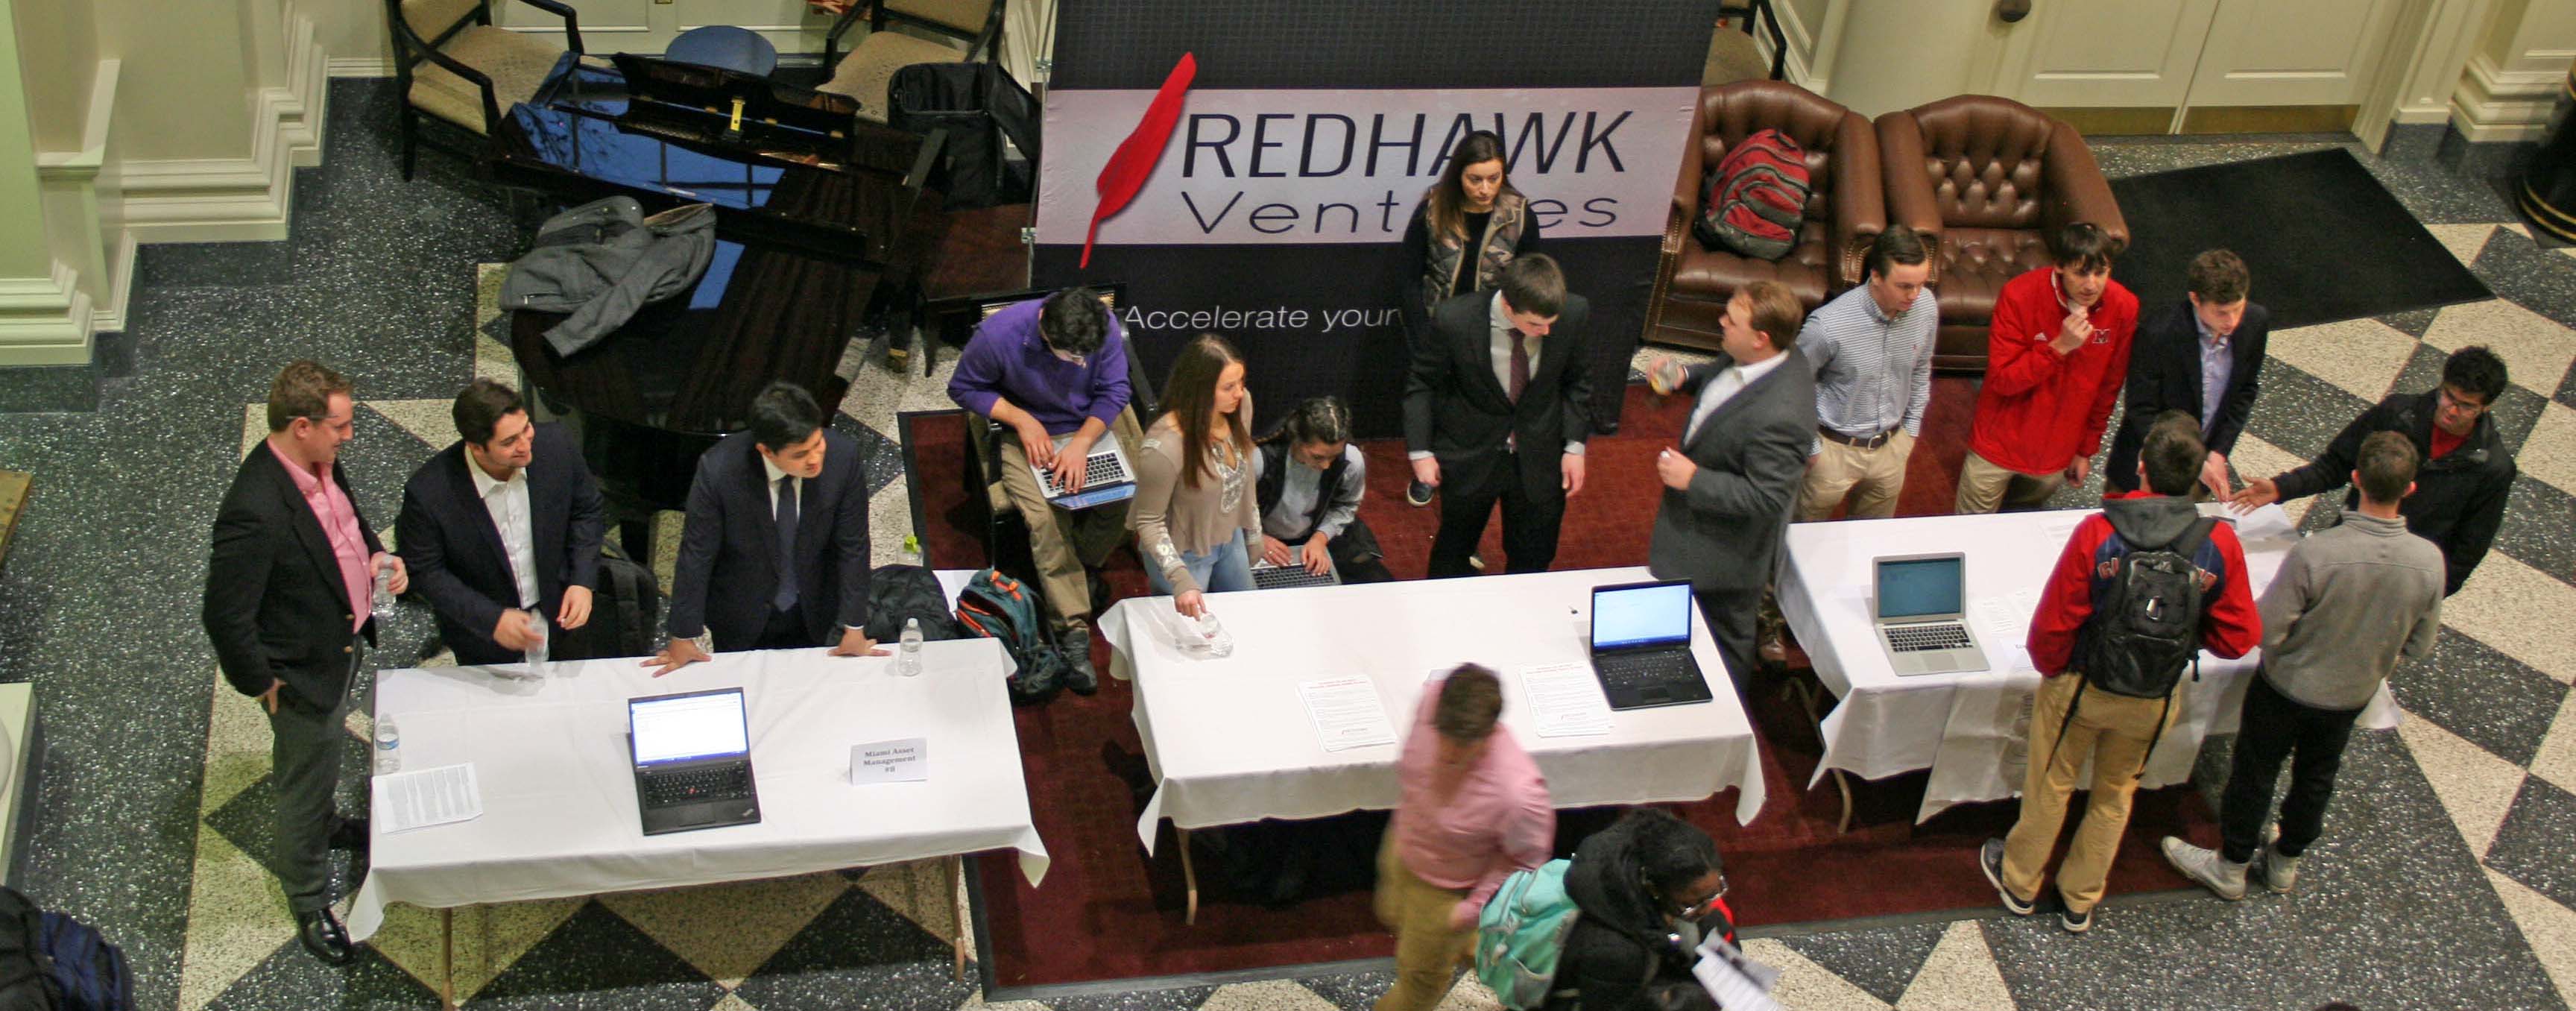  Redhawk Ventures table at Meet the B-Orgs